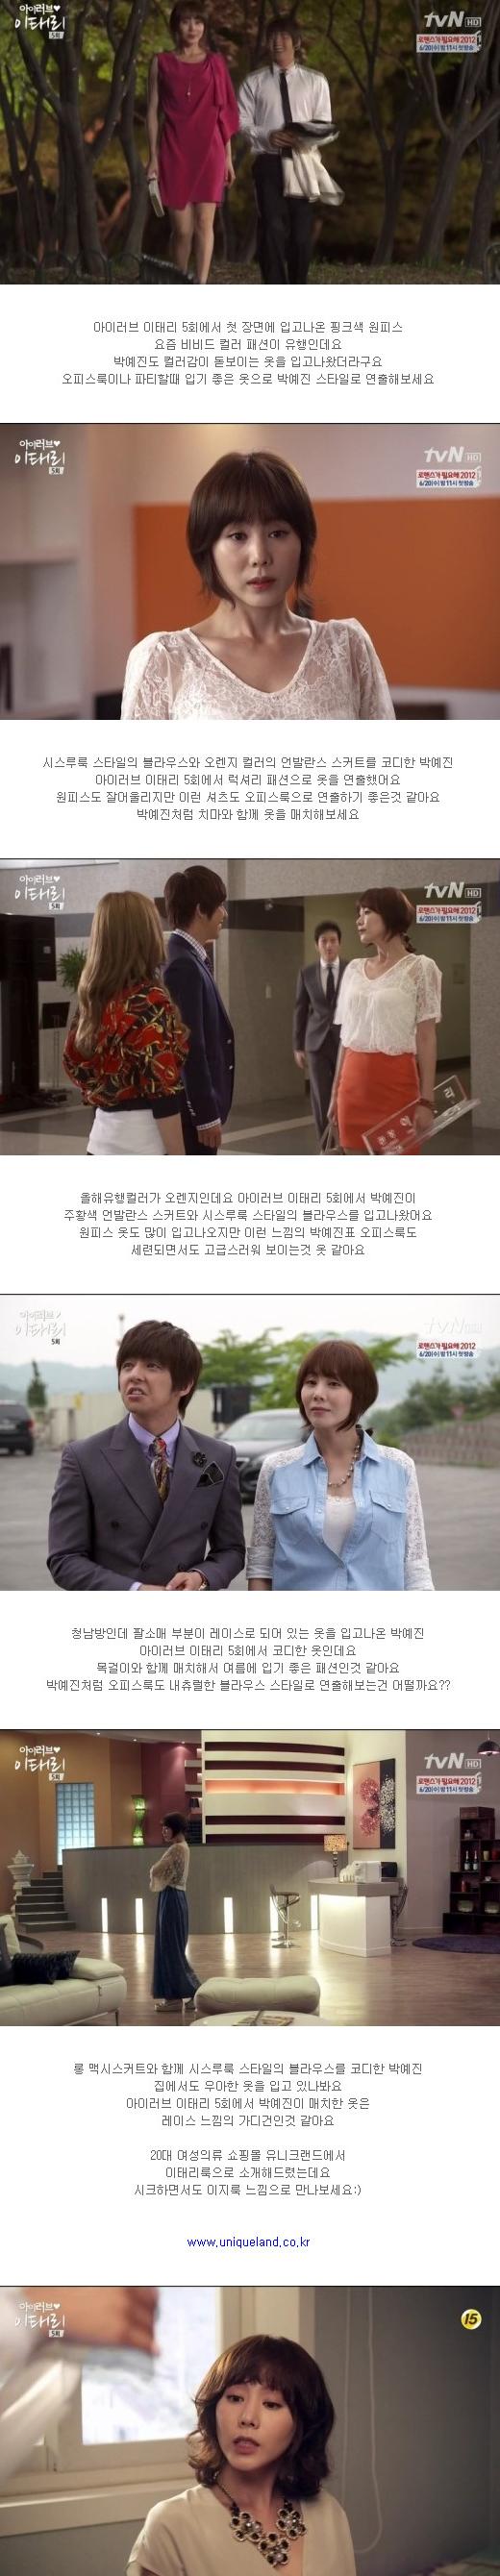 episode 5 captures for the Korean drama 'I Love Italy'